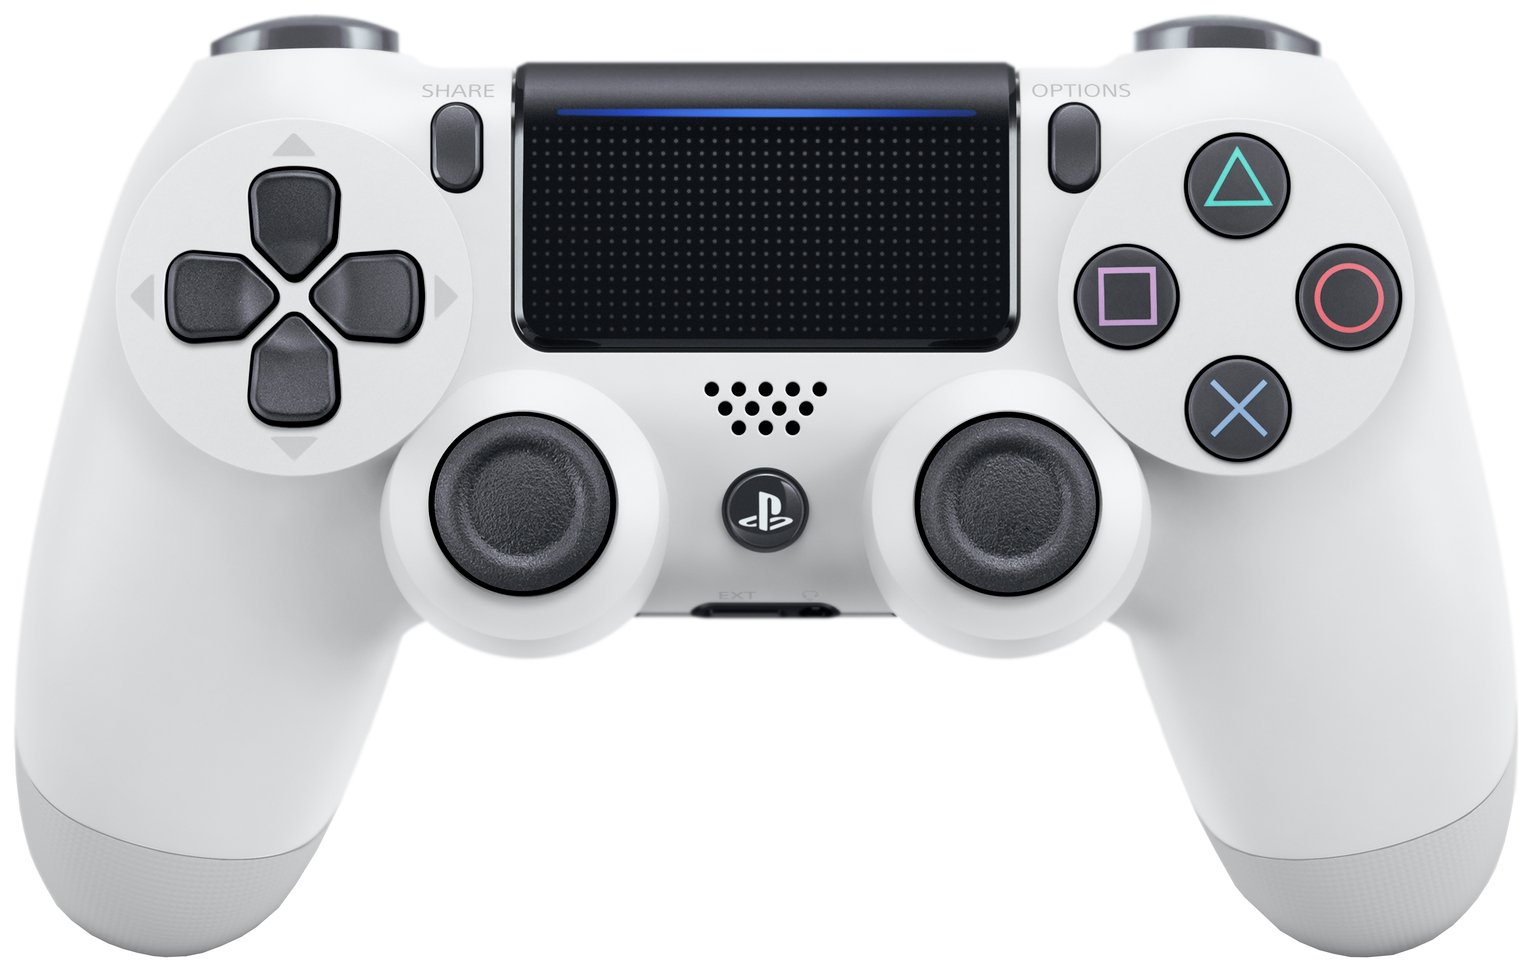 Vedholdende anmodning Frø White Ps4 Controller Argos Spain, SAVE 35% - eagleflair.com